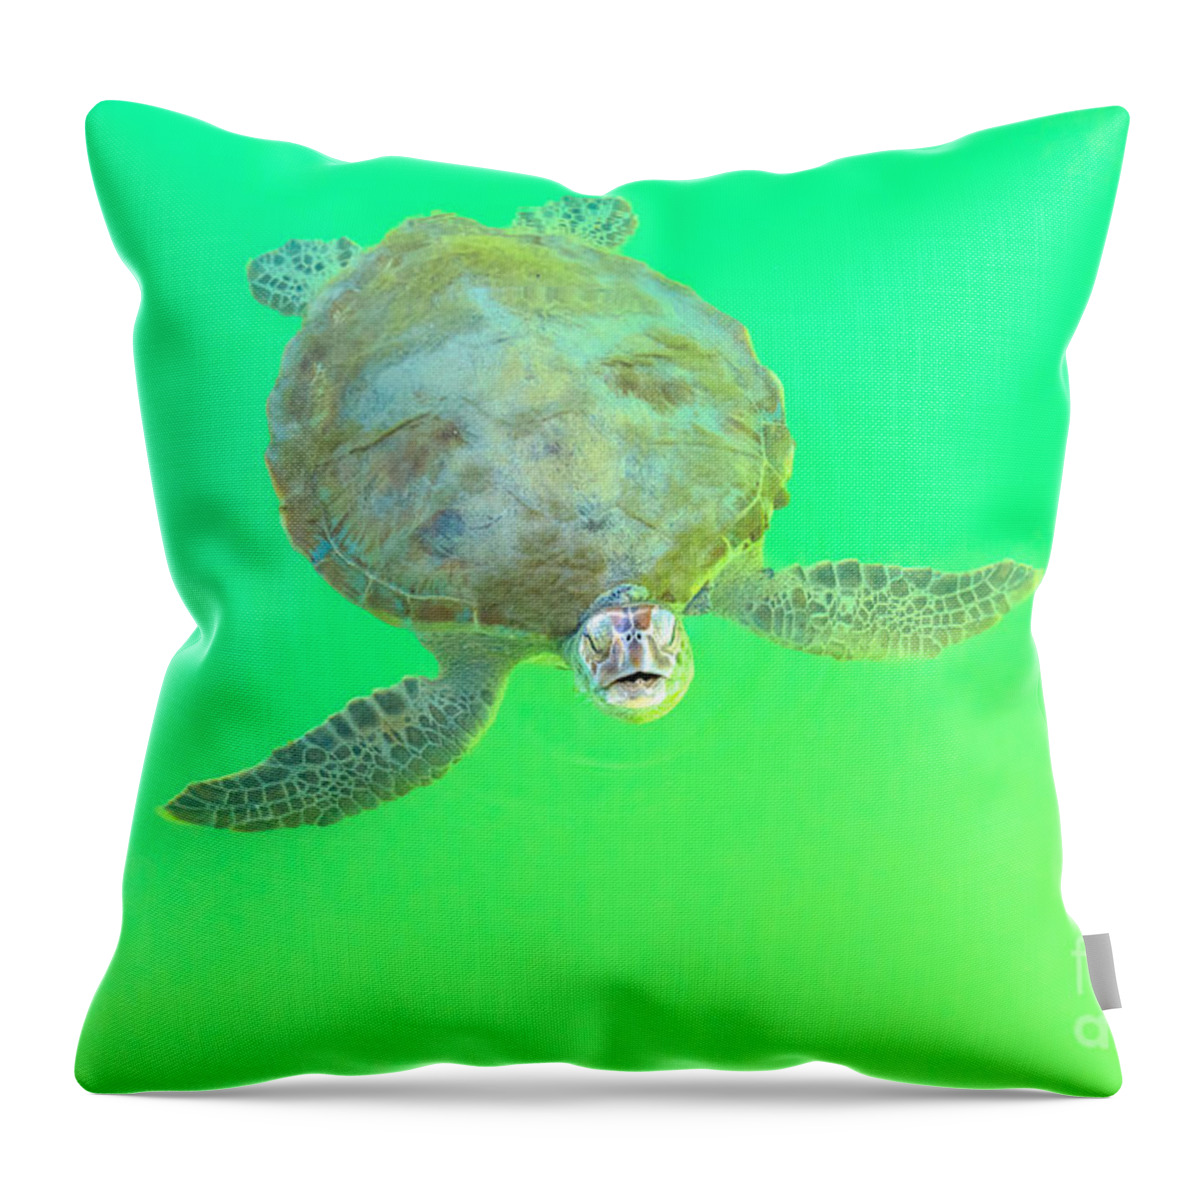 Green Turtle Throw Pillow featuring the photograph Green Sea Turtle #1 by Benny Marty